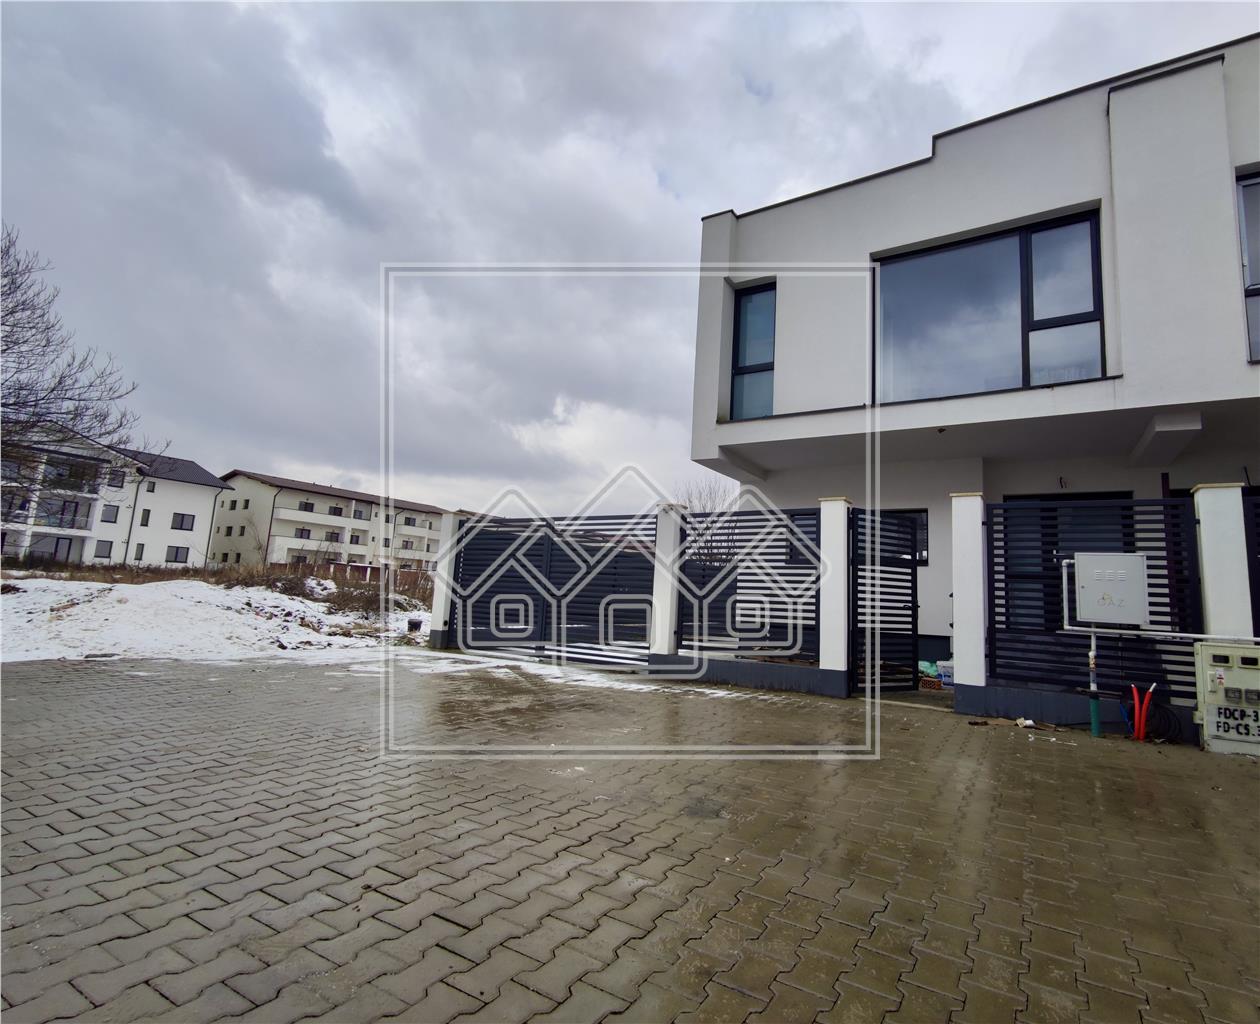 House for sale in Sibiu | duplex type | finished key -  free yard 180